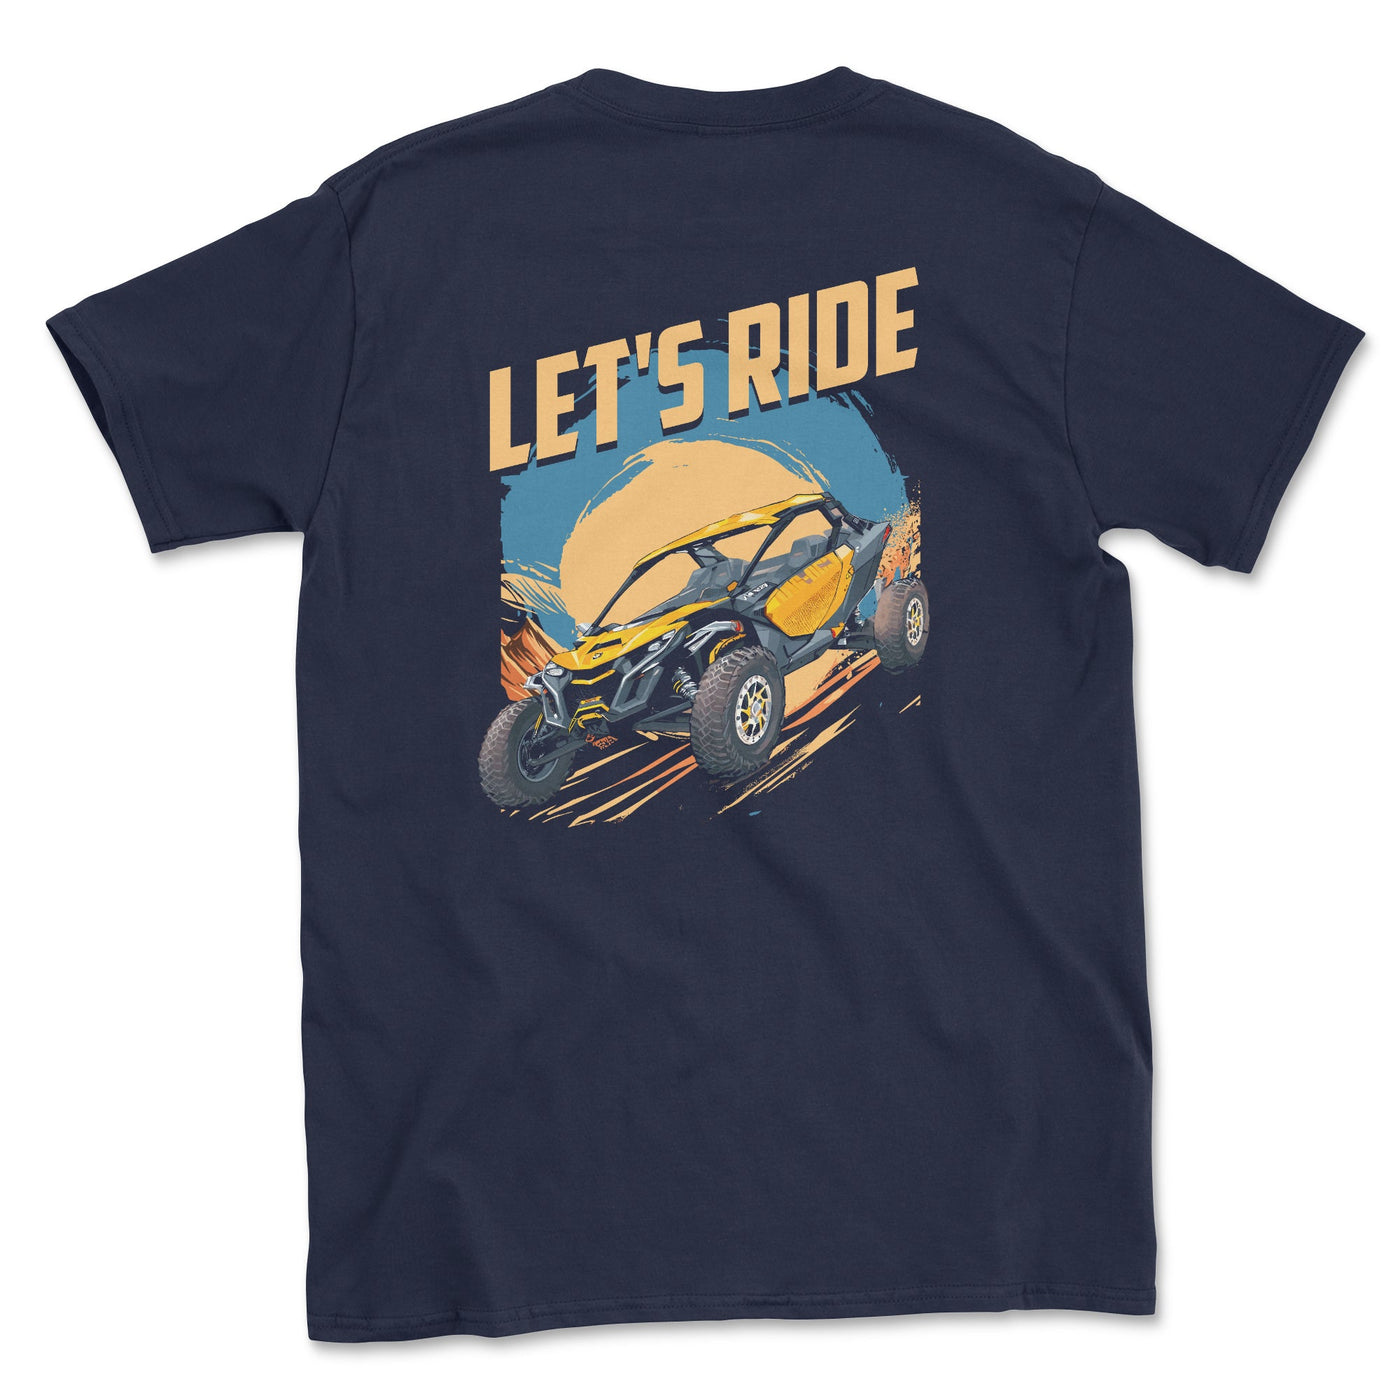 Offroading Shirts-Let's Ride SXS - Goats Trail Off-Road Apparel Company